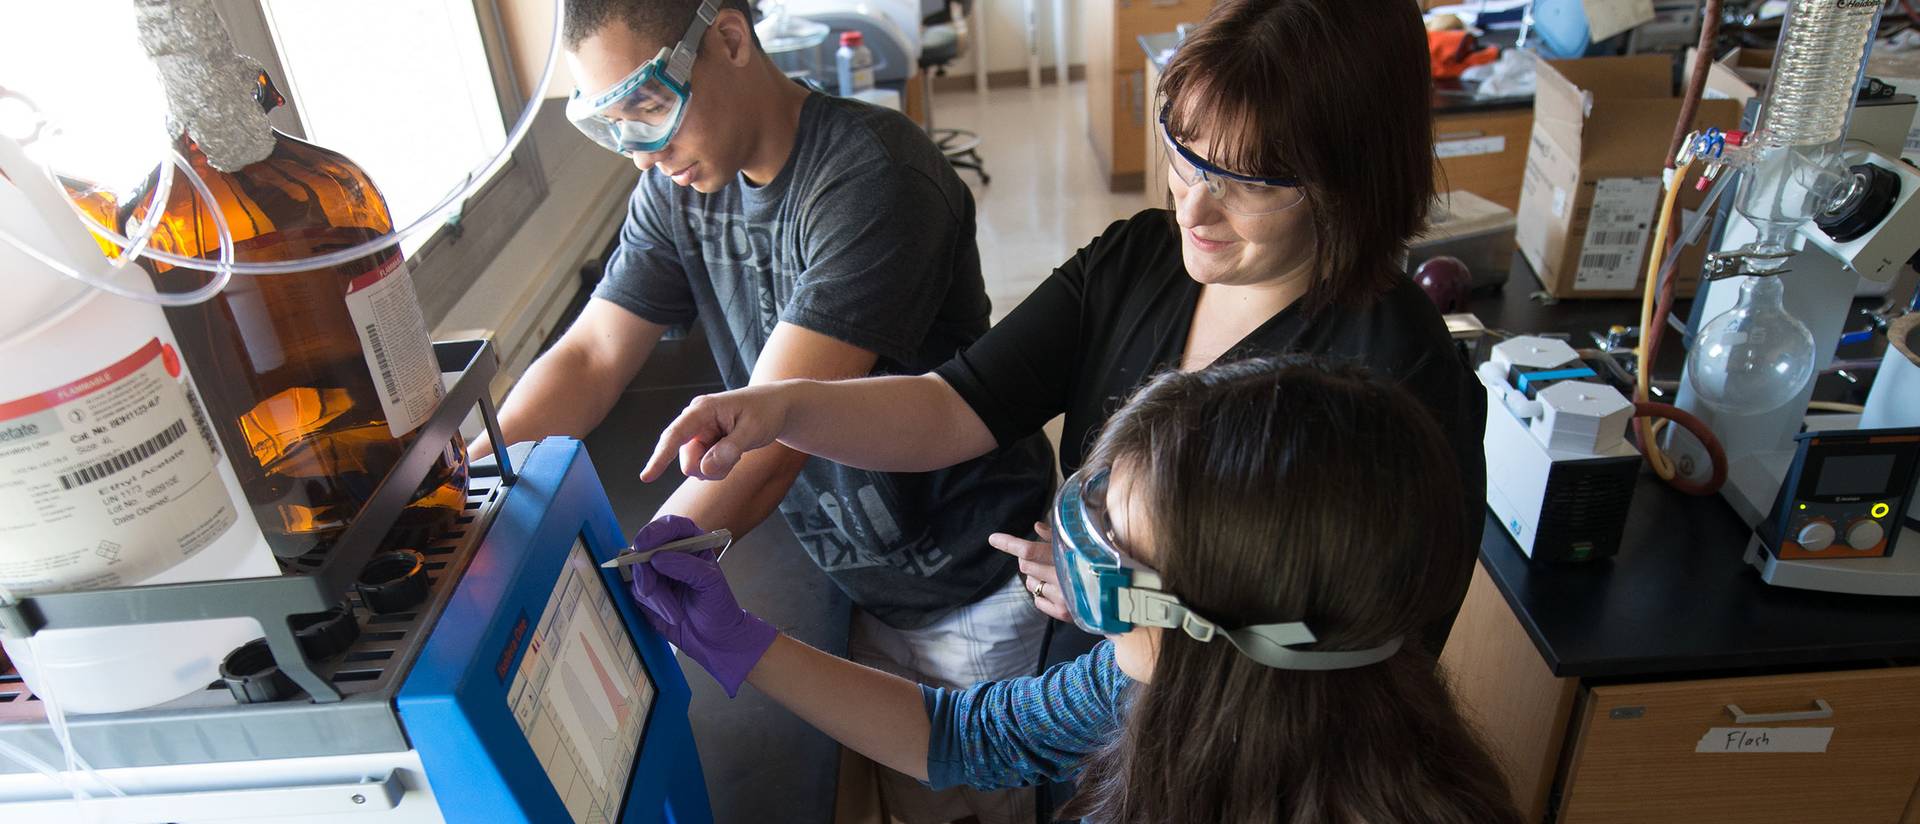 Tayo Sanders (left) works with research mentor Jennifer Dahl (middle), an assistant professor in materials science, on cross-linked gold nanoparticle films